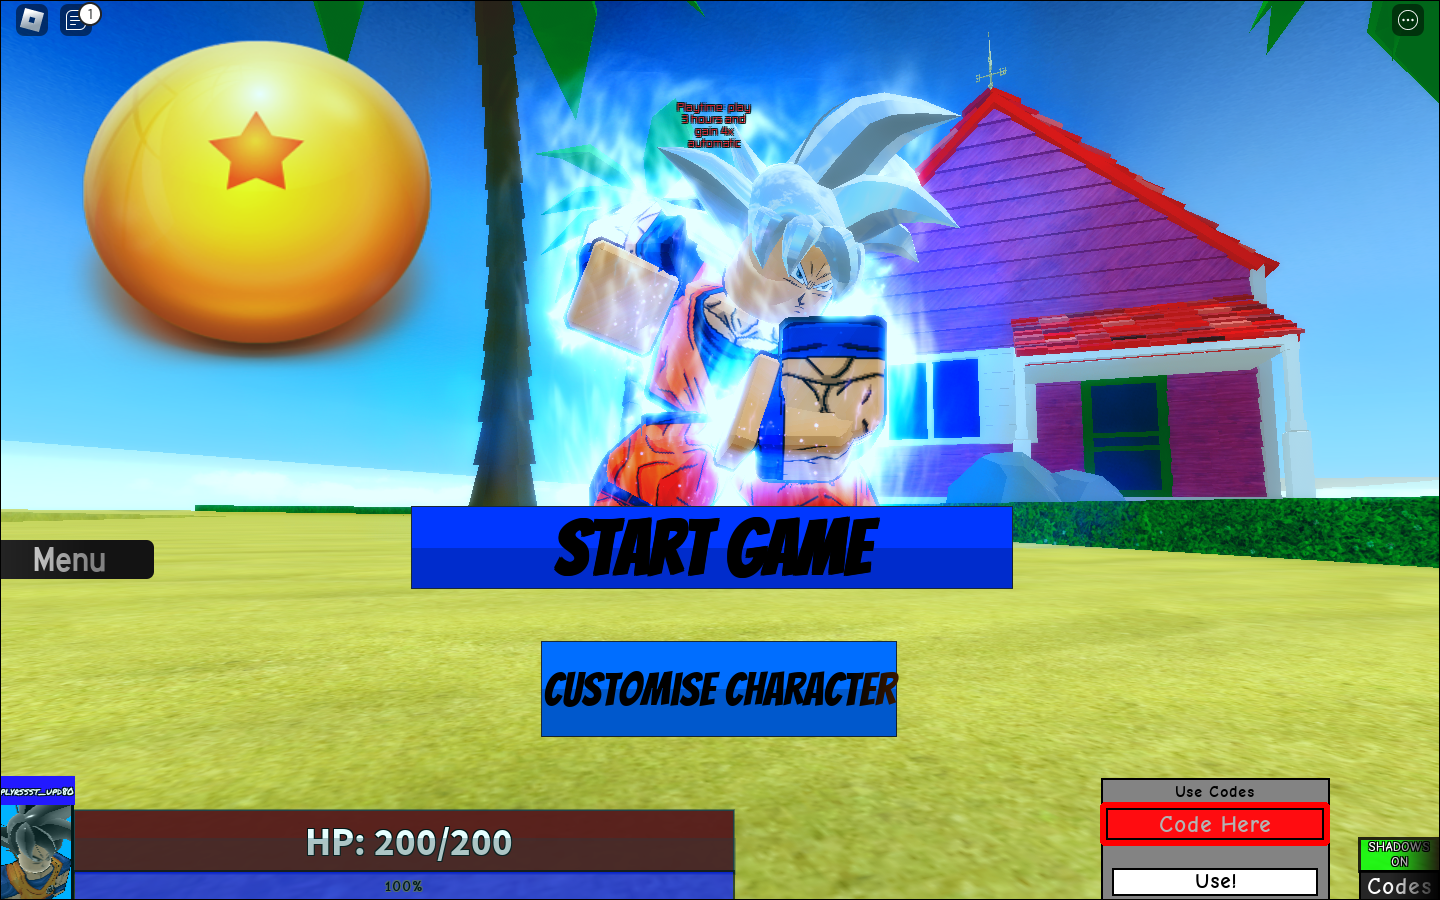 All Dragon Ball XL Codes(Roblox) - Tested October 2022 - Player Assist